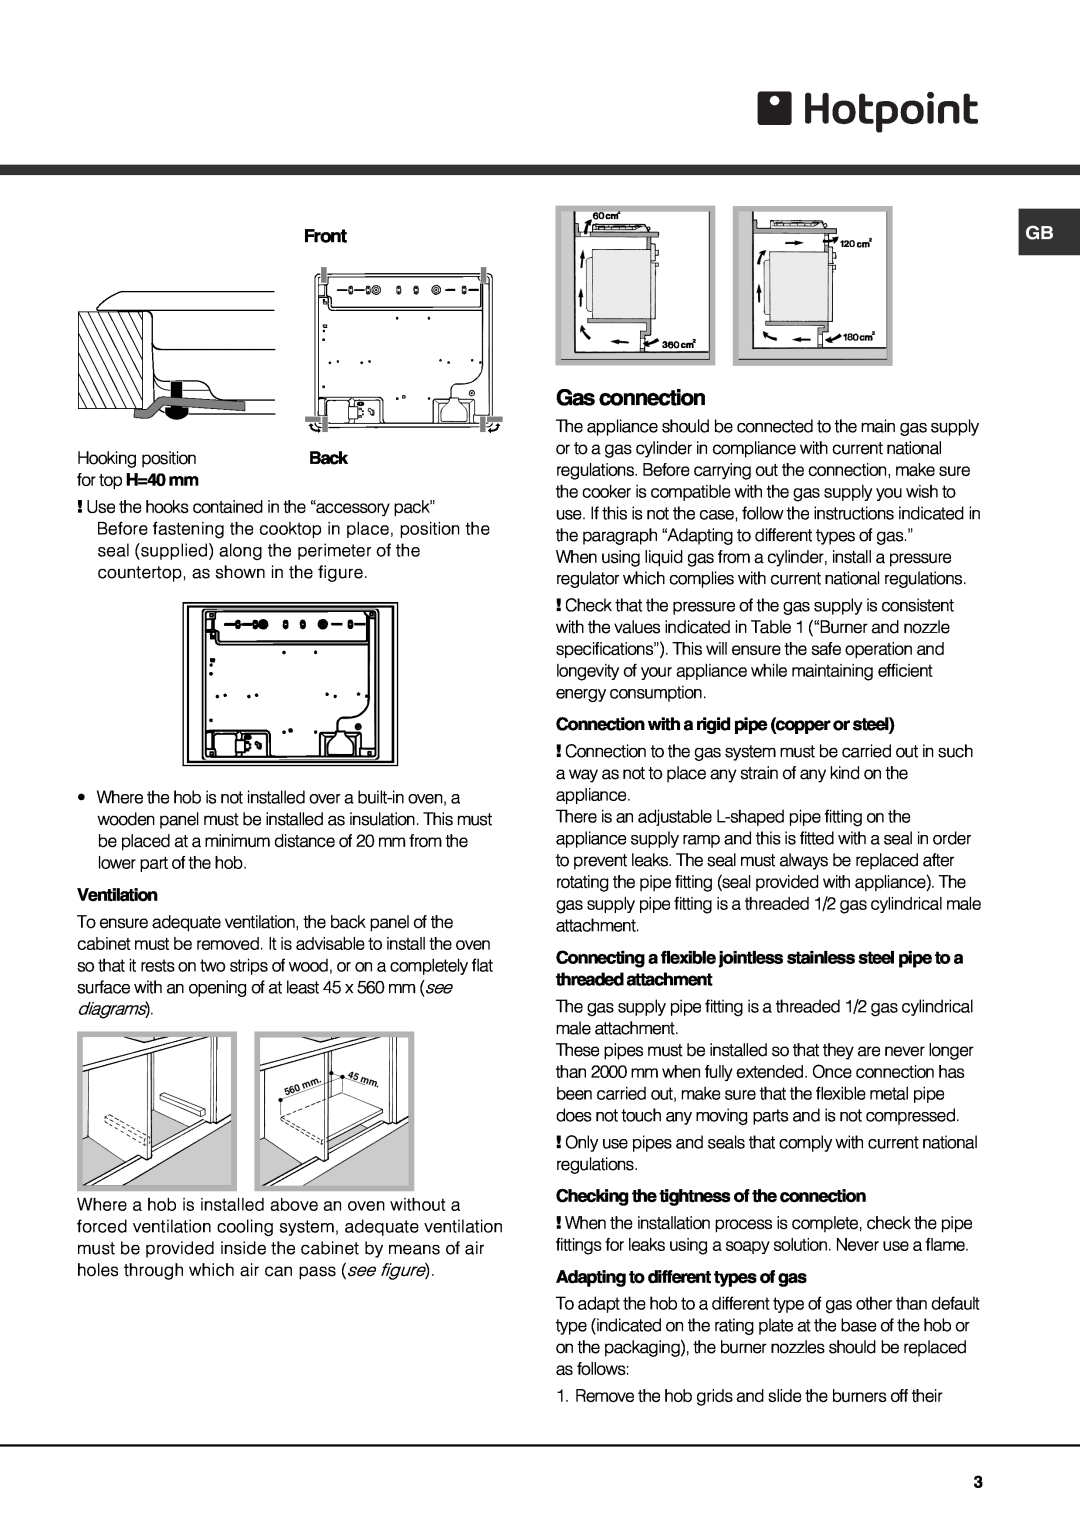 Hotpoint GQ64ST, GQ74SI, GQ64SI, GQ74ST specifications Gas connection, Back 